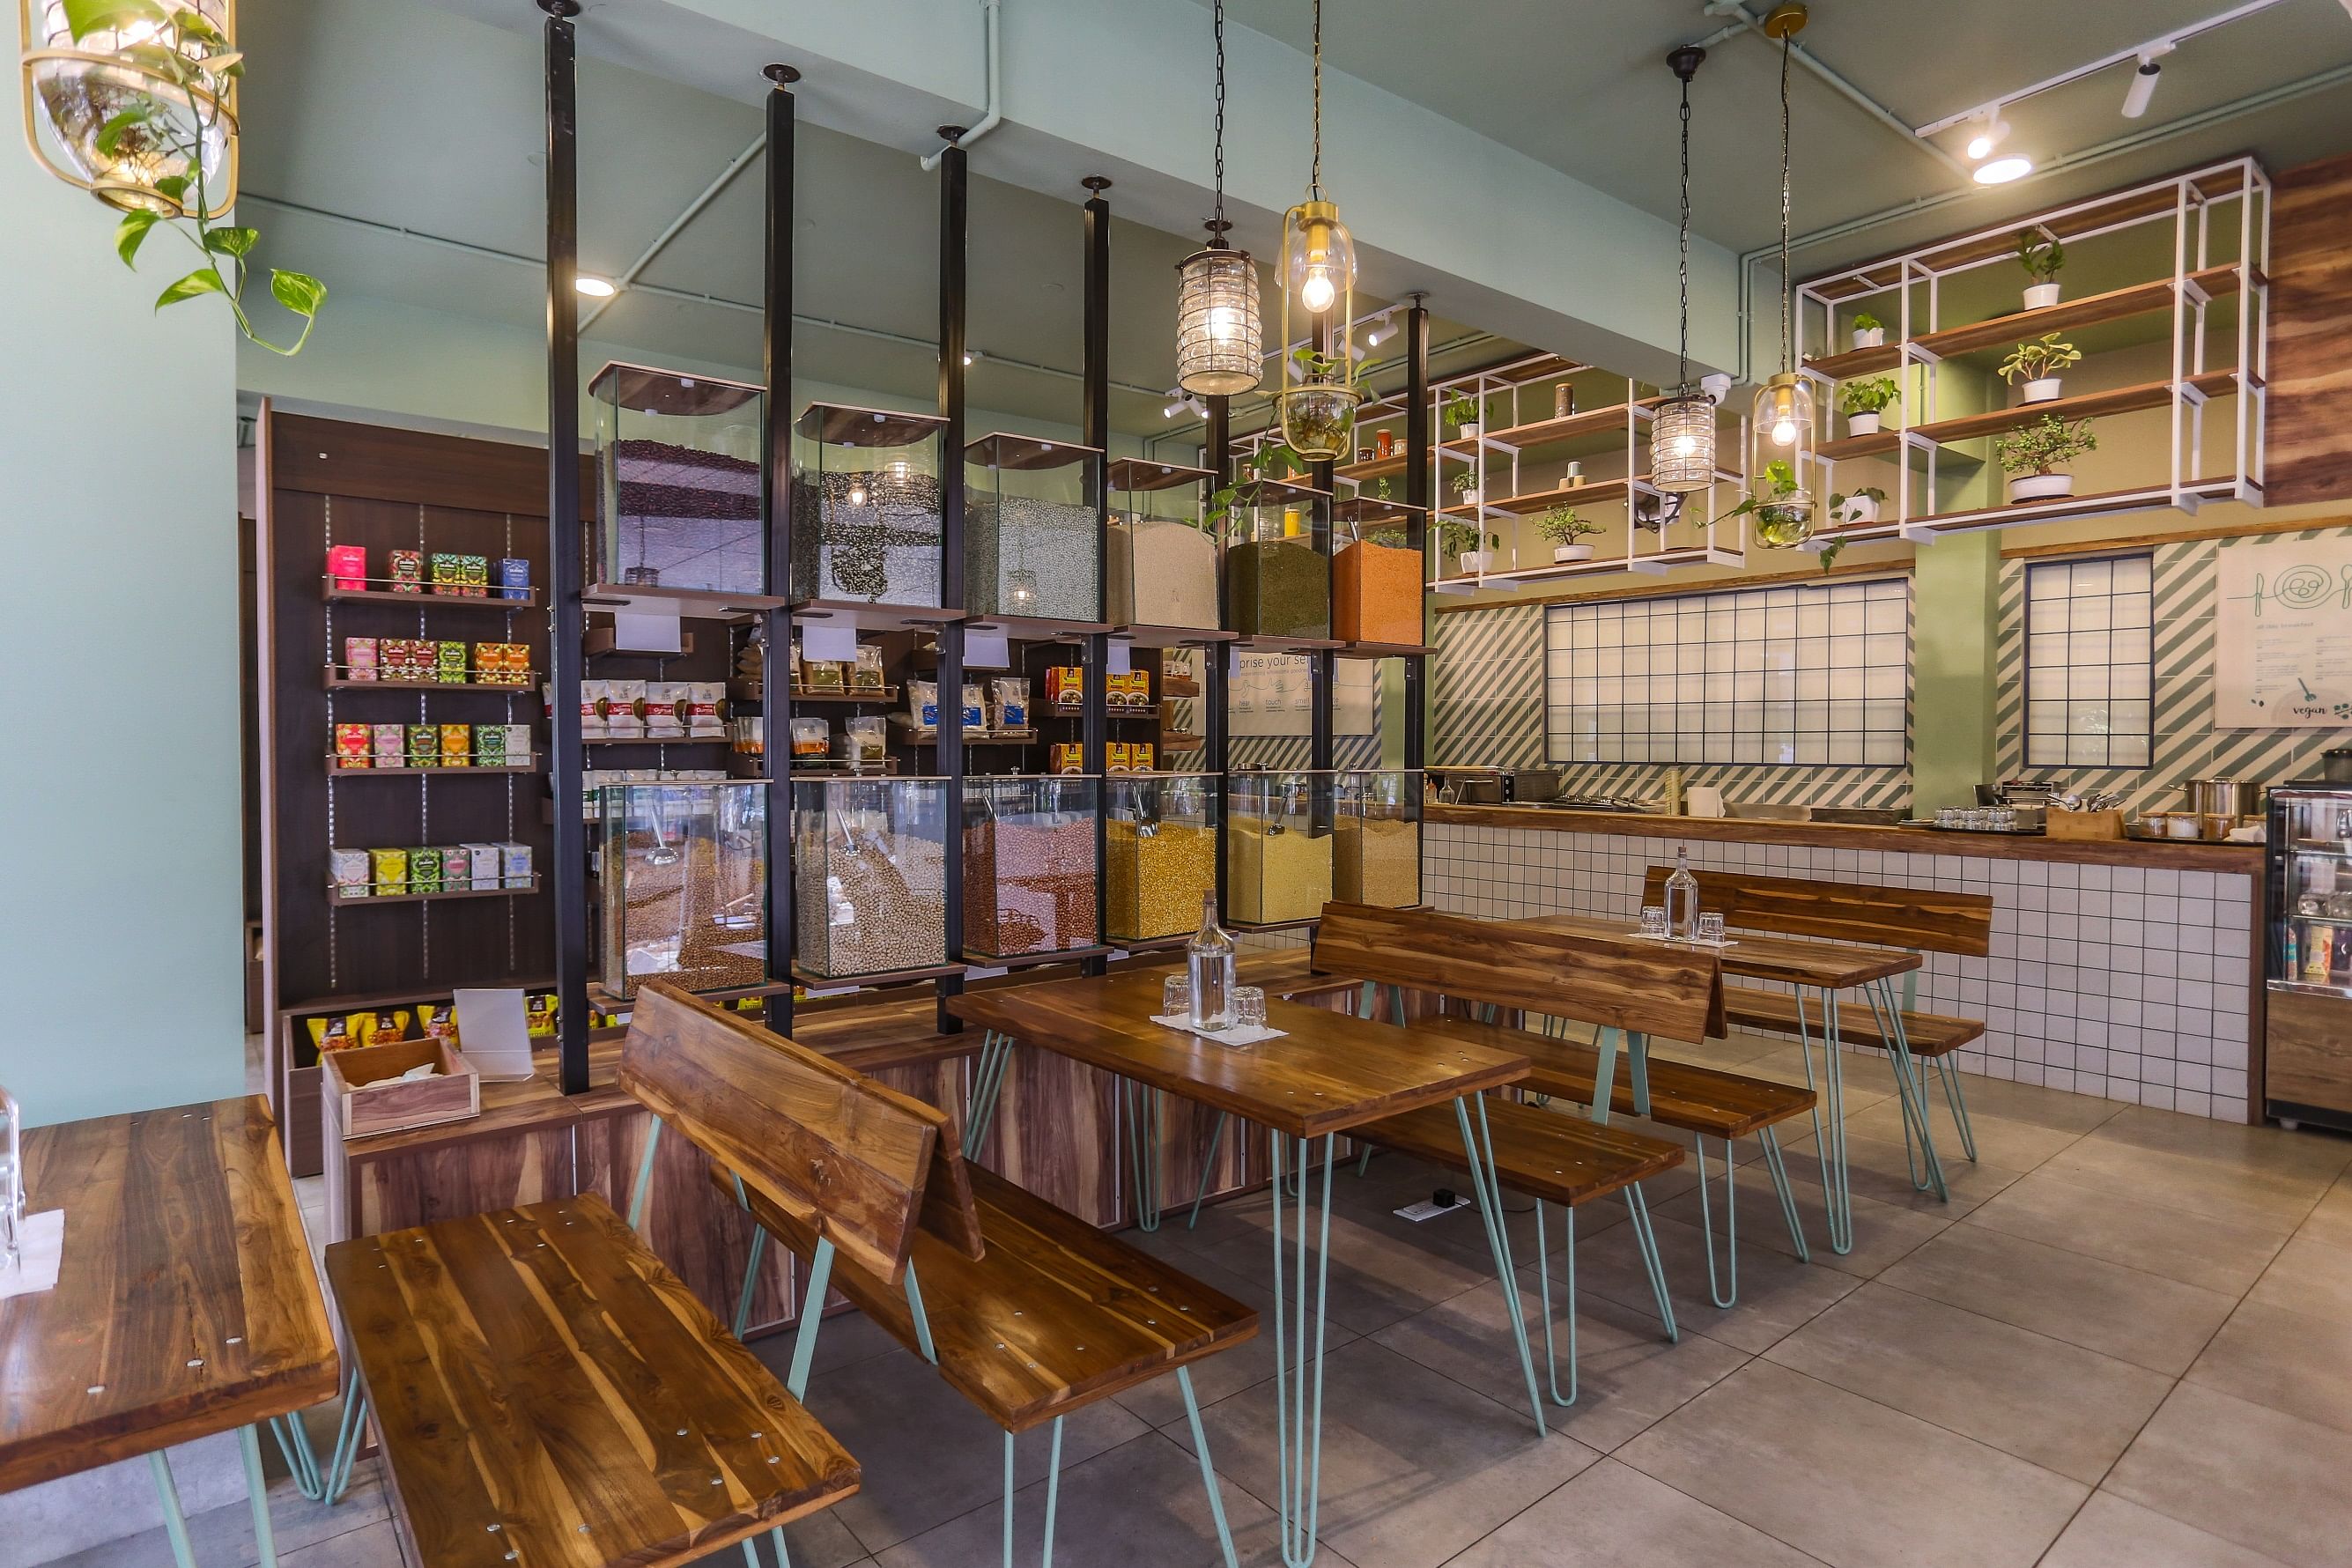 Located in Jayanagar, the cafe has a bright and colourful look.